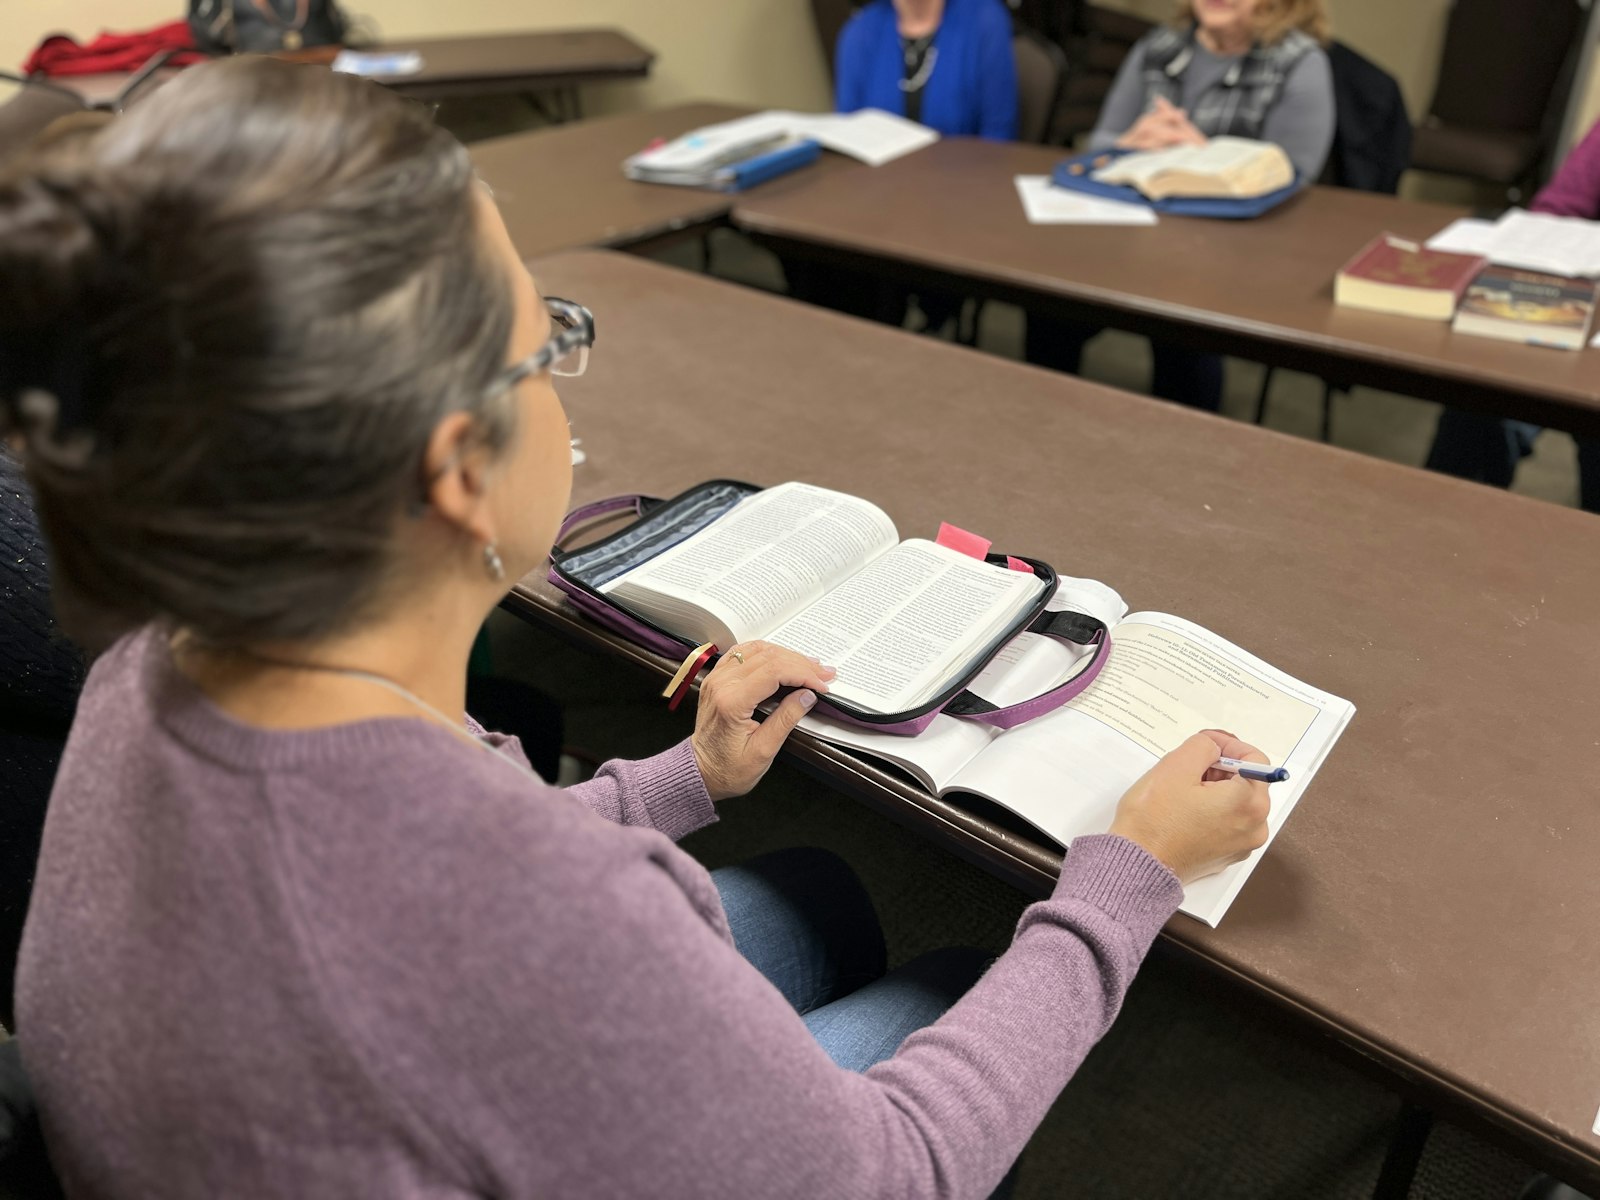 The Women's Catholic Bible Study group meets each year starting in September and running through the spring, usually ending in March or April. Next year's study begins Sept. 19.